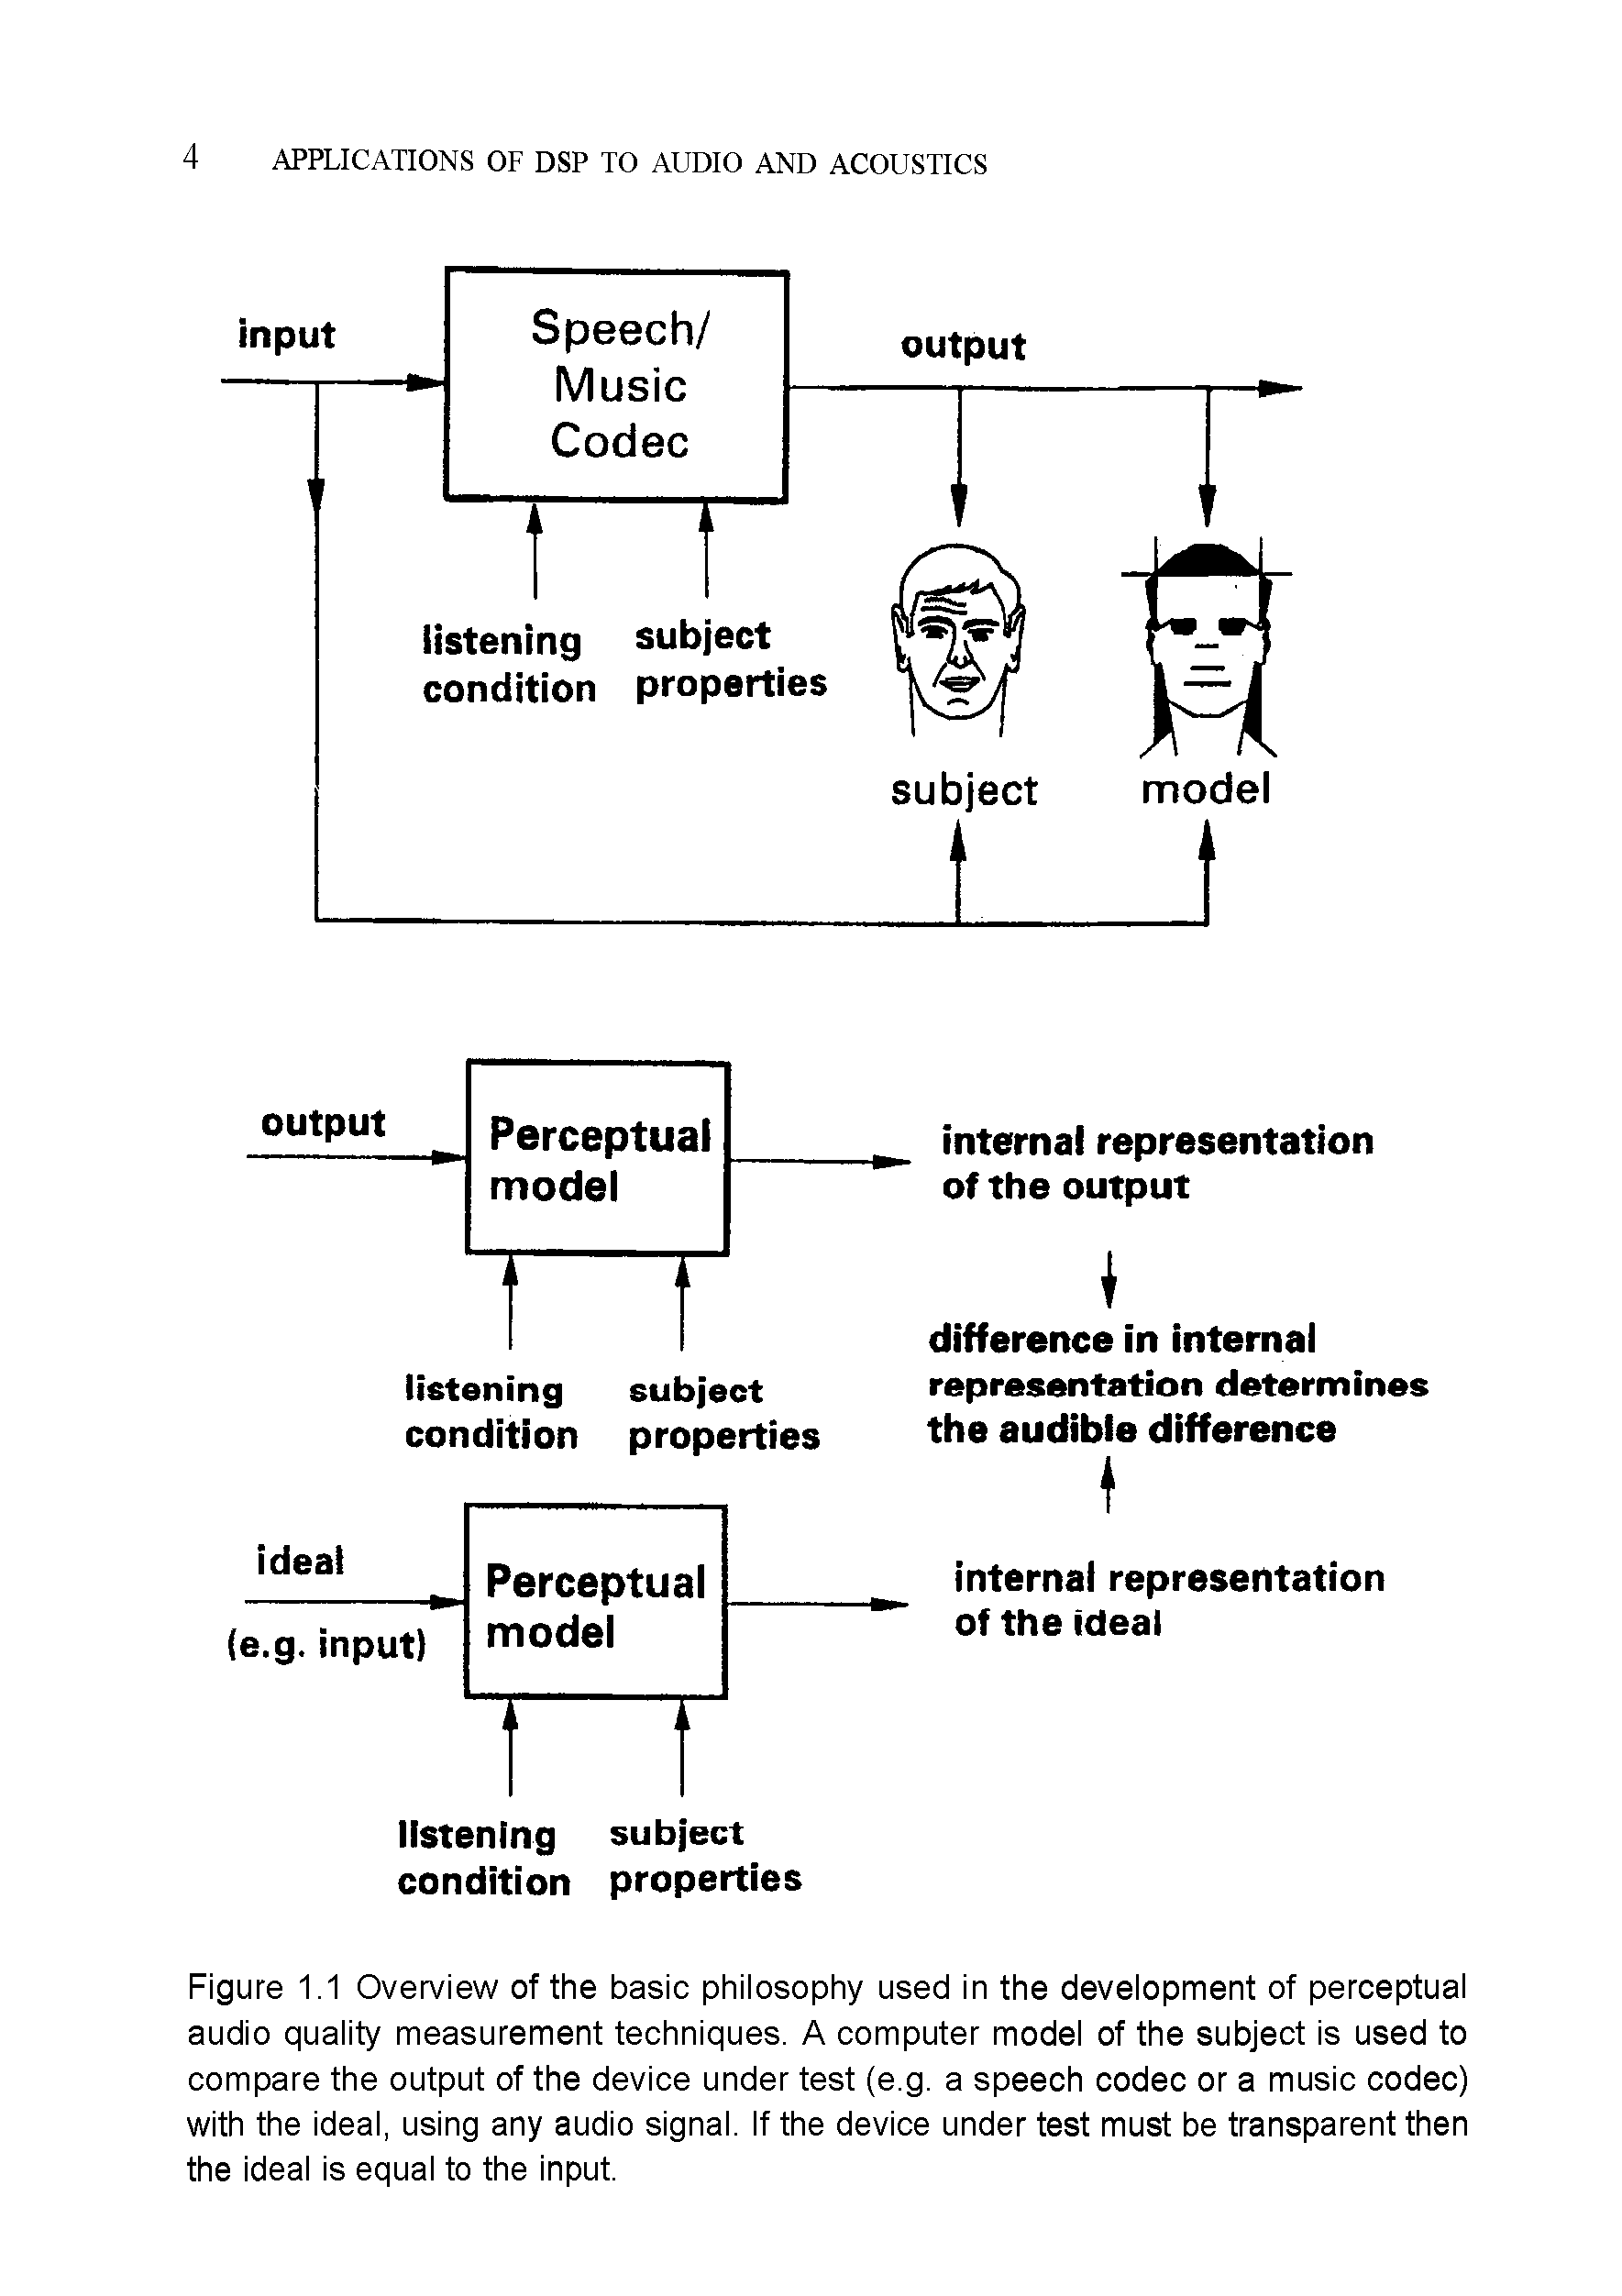 Figure 1.1 Overview of the basic philosophy used in the development of perceptual audio quality measurement techniques. A computer model of the subject is used to compare the output of the device under test (e.g. a speech codec or a music codec) with the ideal, using any audio signal. If the device under test must be transparent then the ideal is equal to the input.